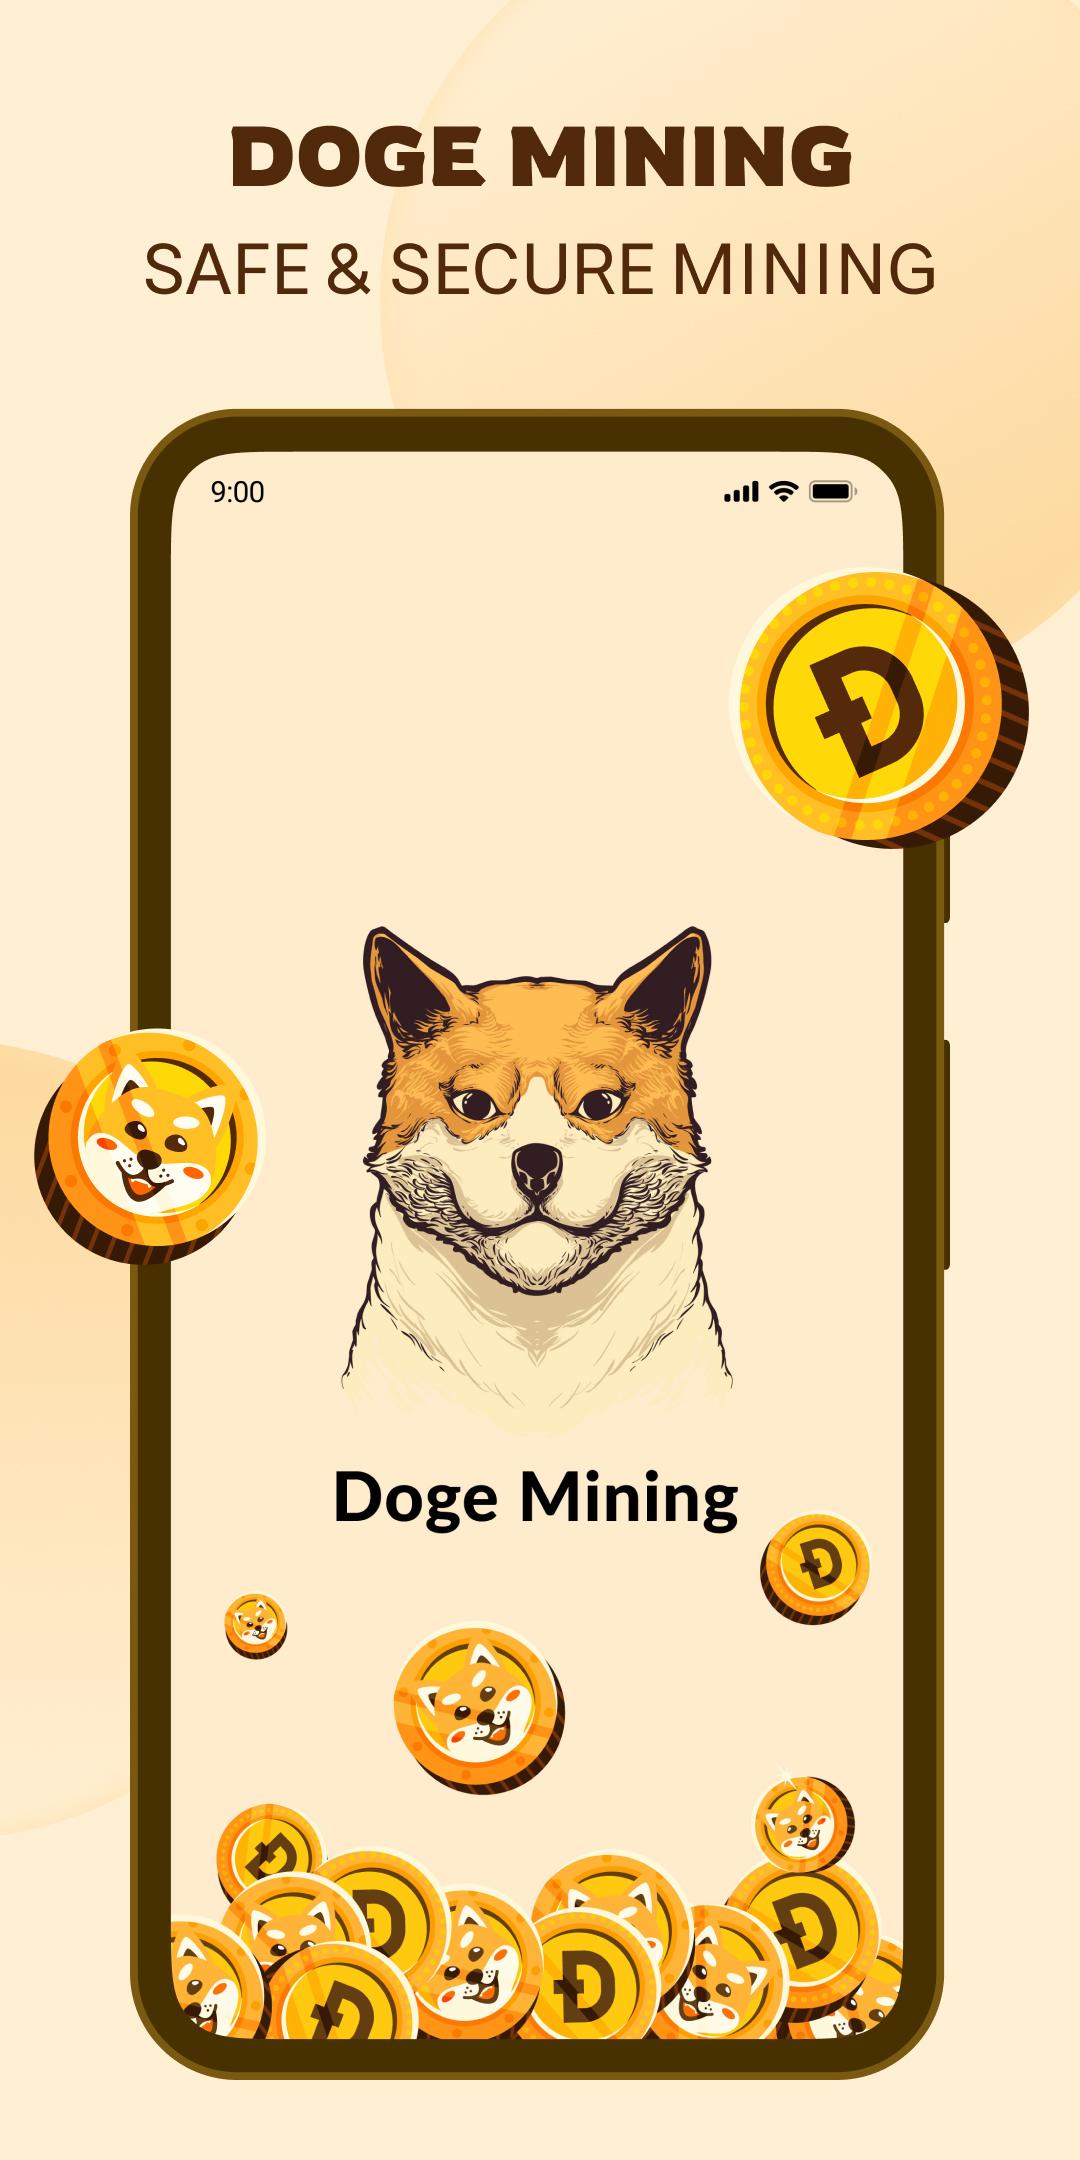 Free Cloud Mining Dogecoin APK Download For Android | GetJar